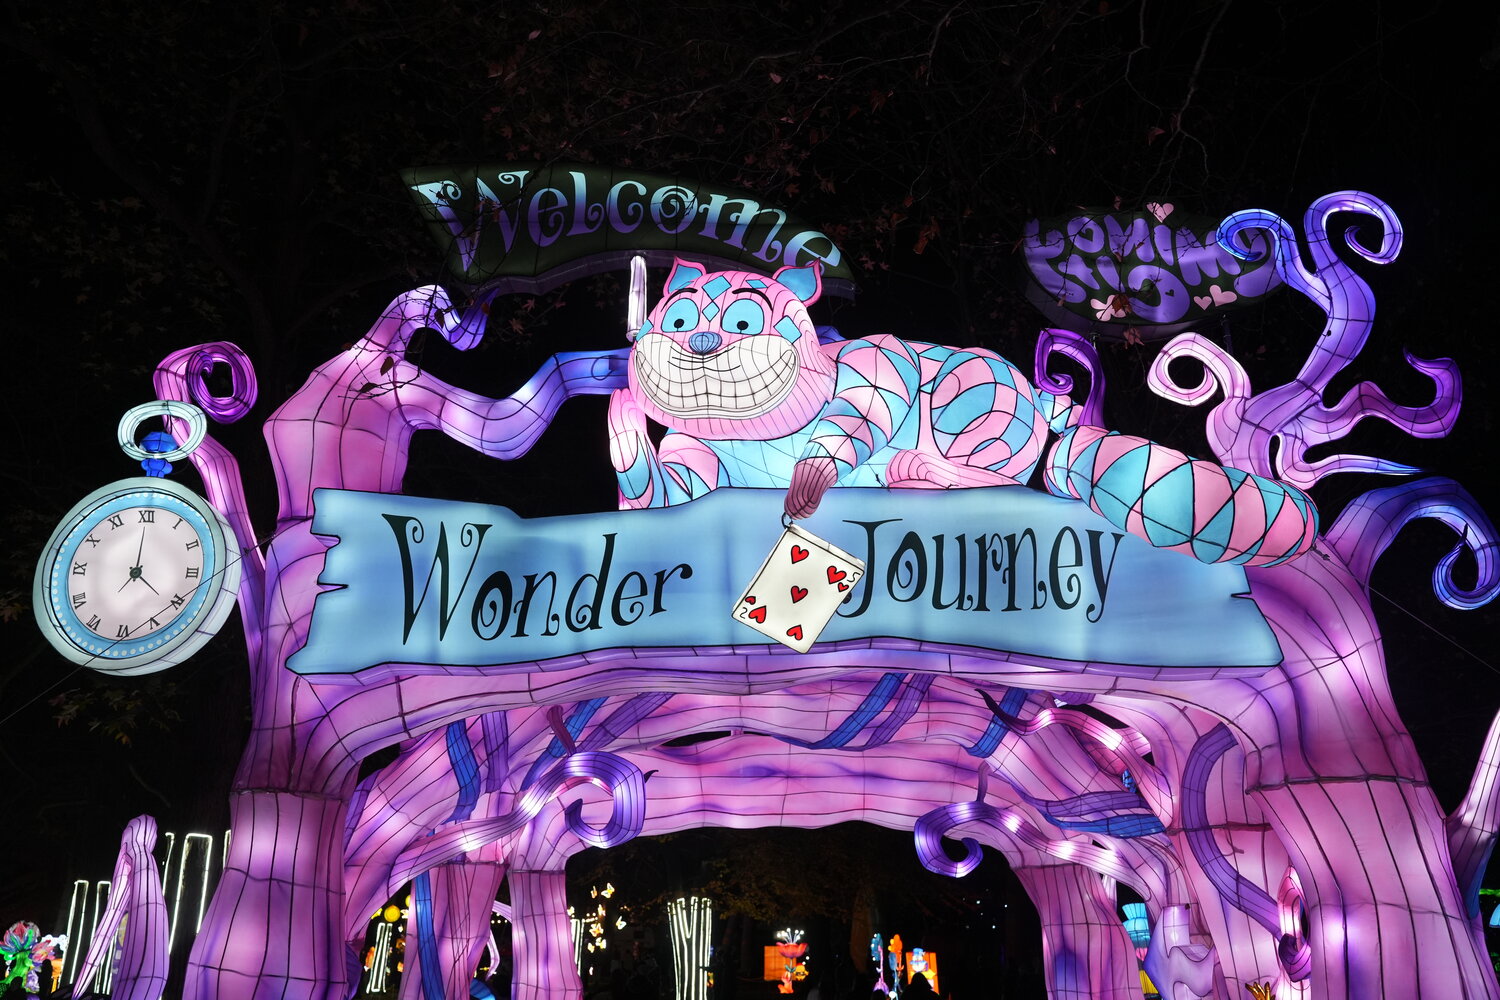 This year’s festival is named ‘Wonder Journey,’ making it fitting that the entranceway to attraction is ‘Alice in Wonderland’-themed.